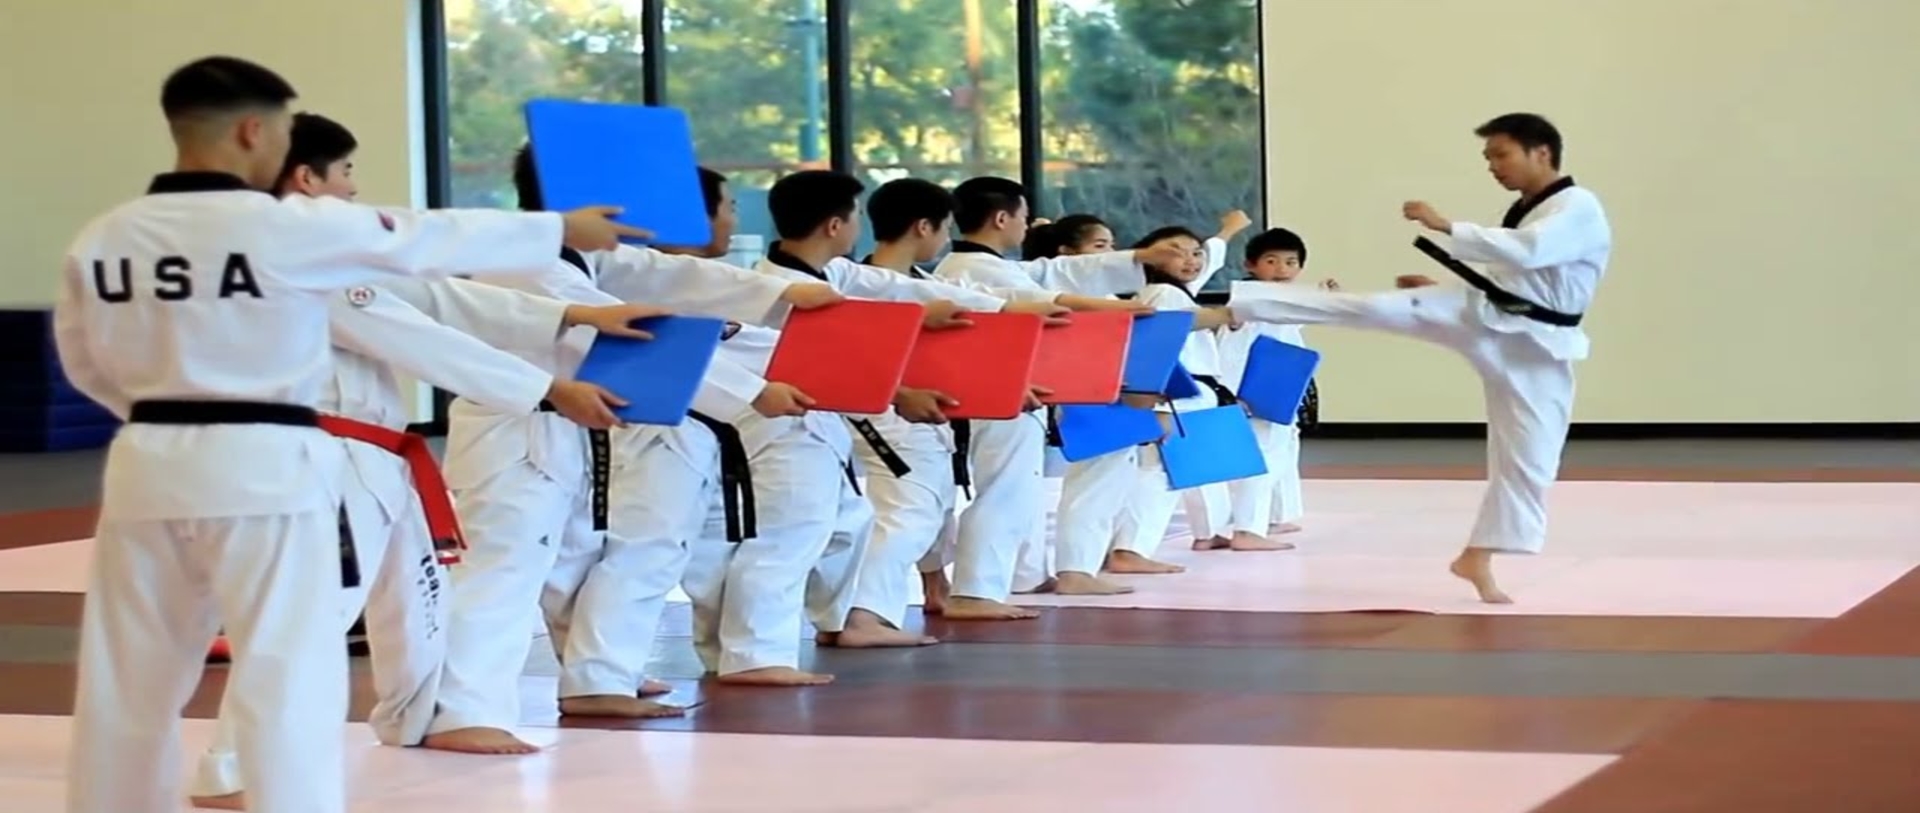 Taekwando Classes By Experts